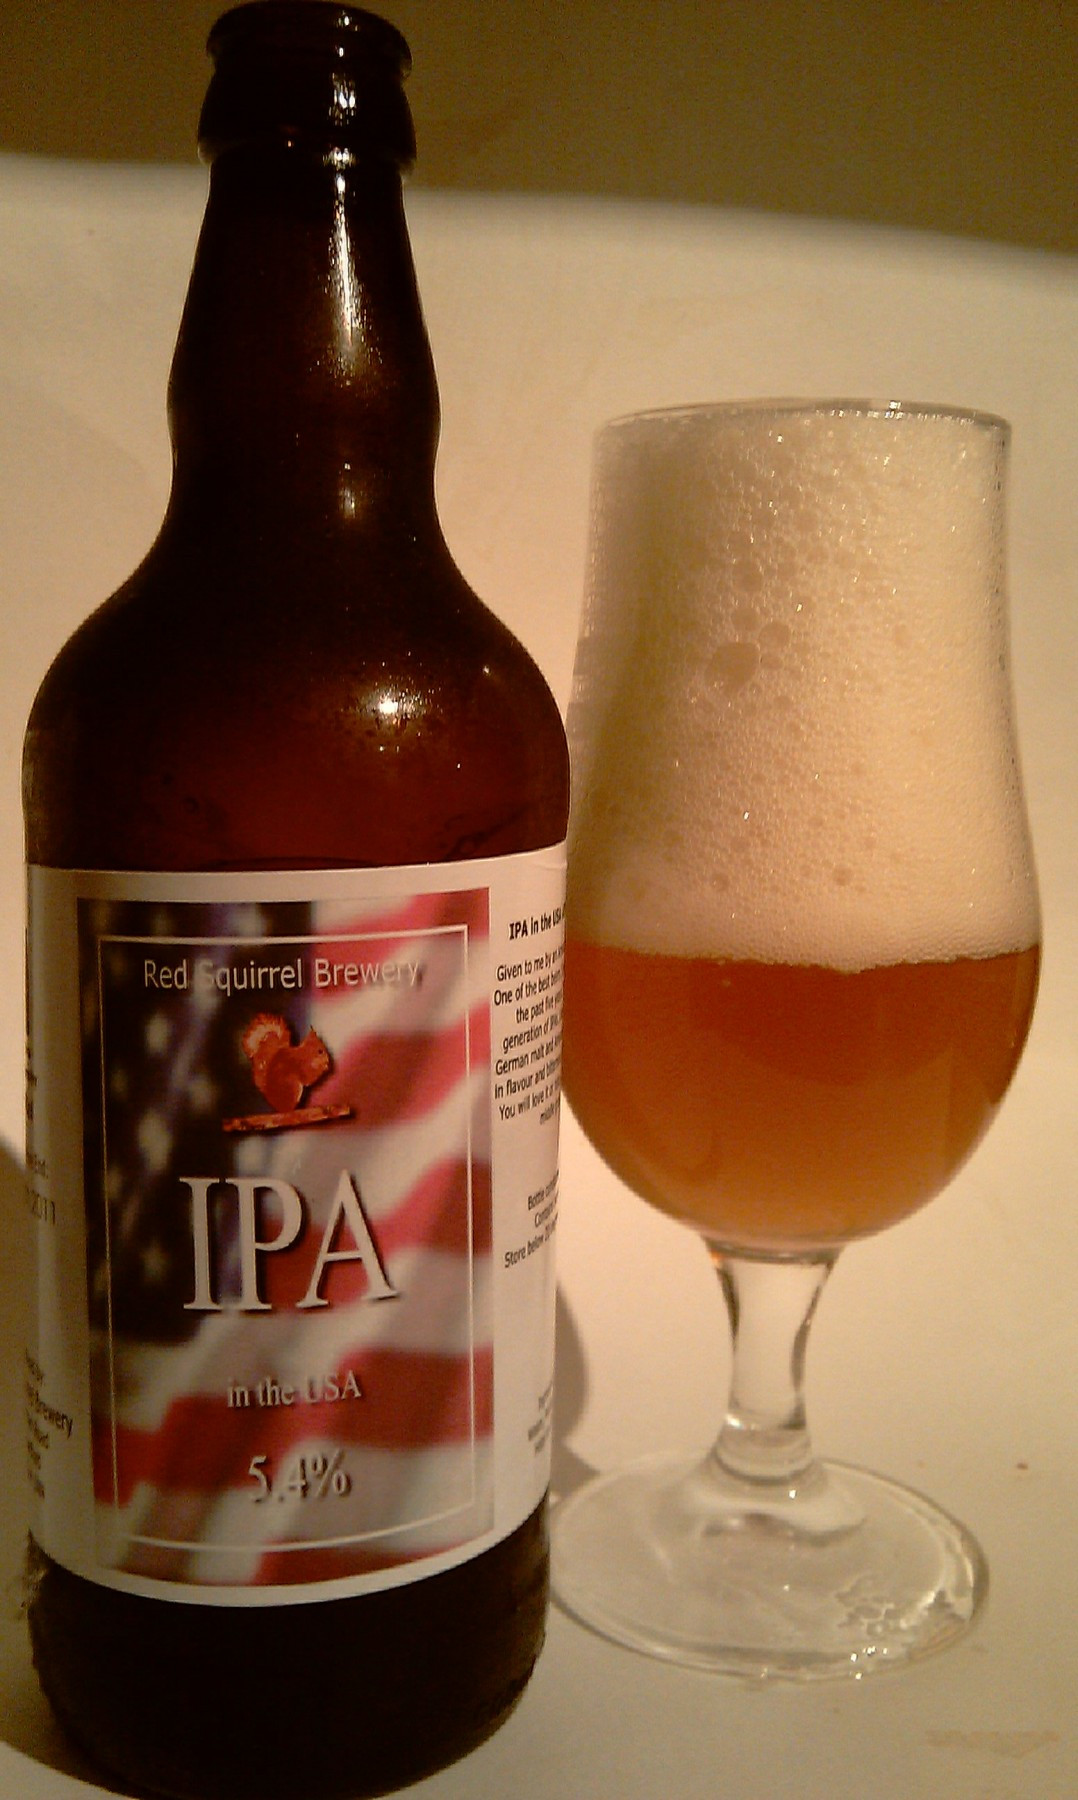 Red Squirrel IPA in the USA